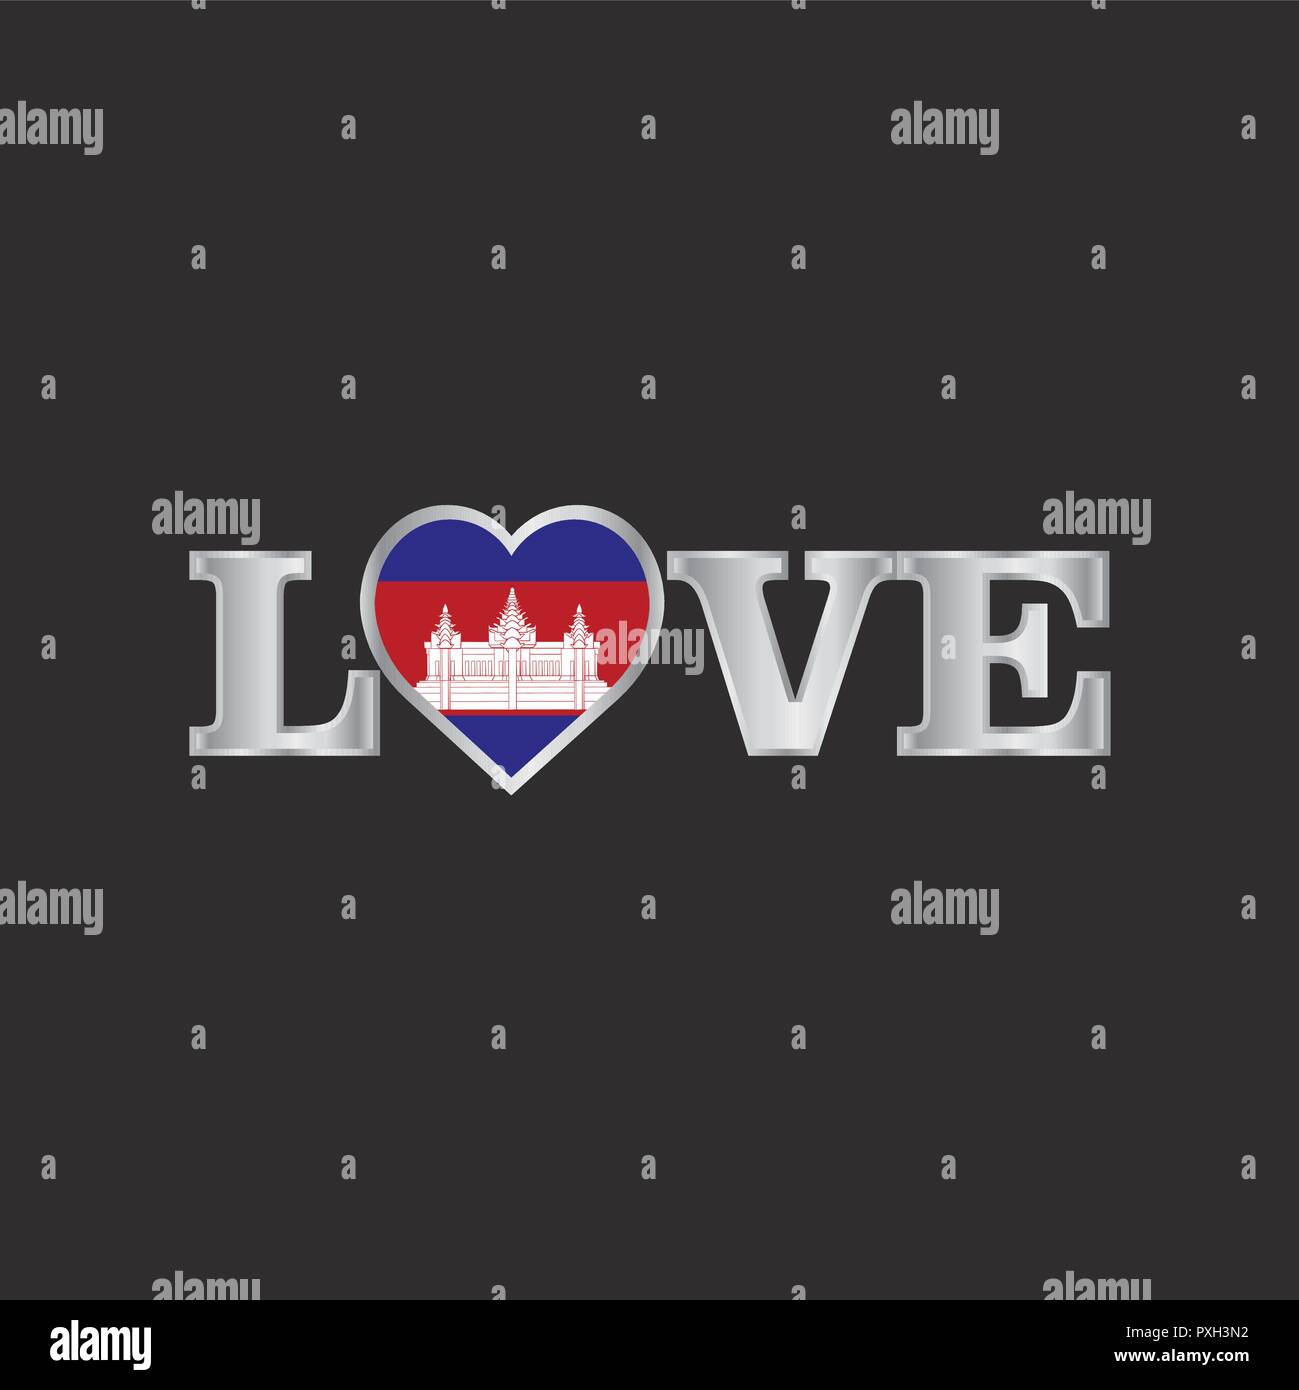 Love typography with Cambodia flag design vector Stock Vector